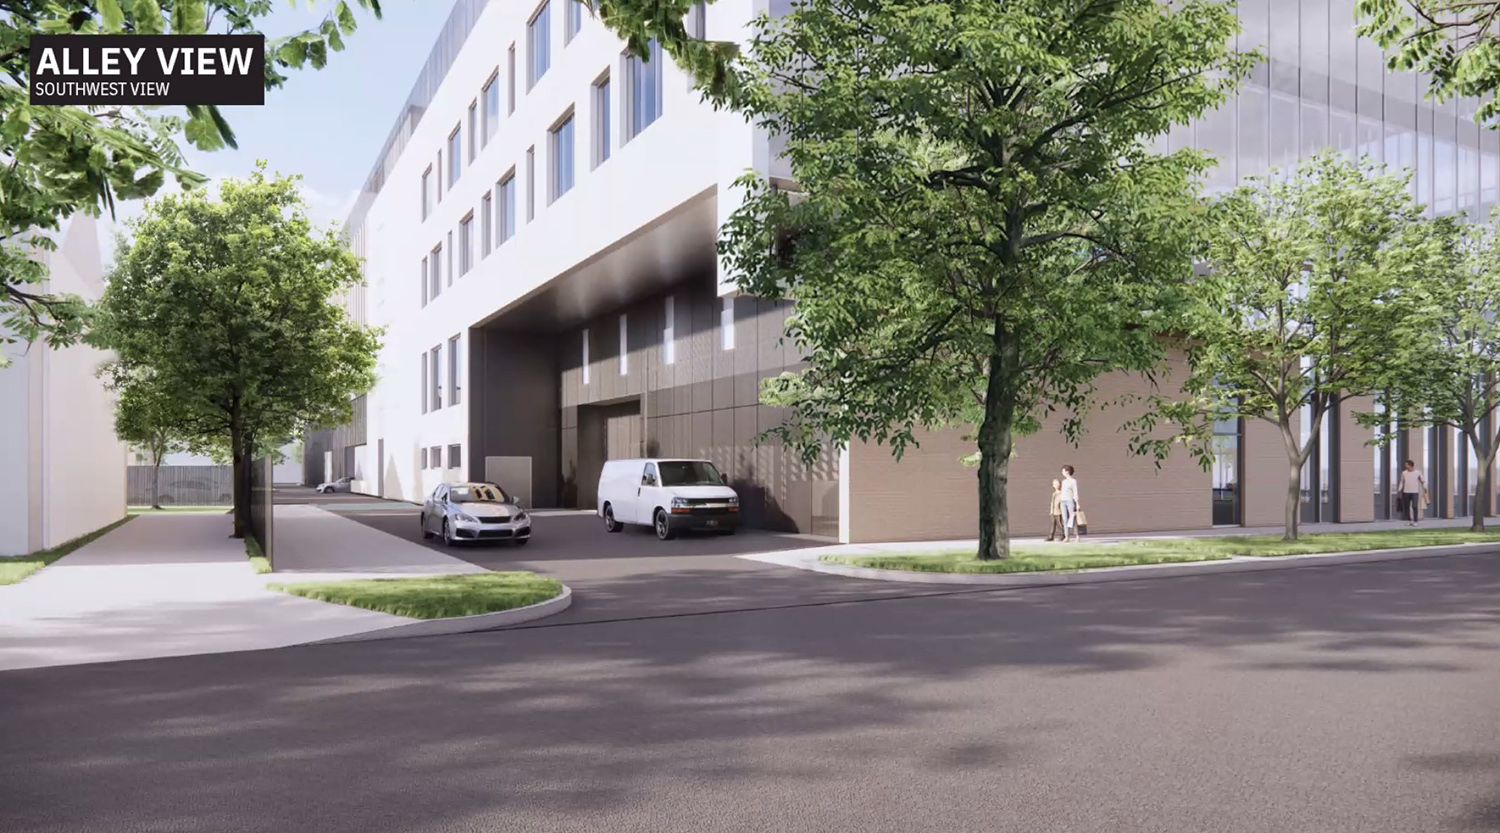 Alley View for Northwestern Medicine Outpatient Center. Rendering by CannonDesign